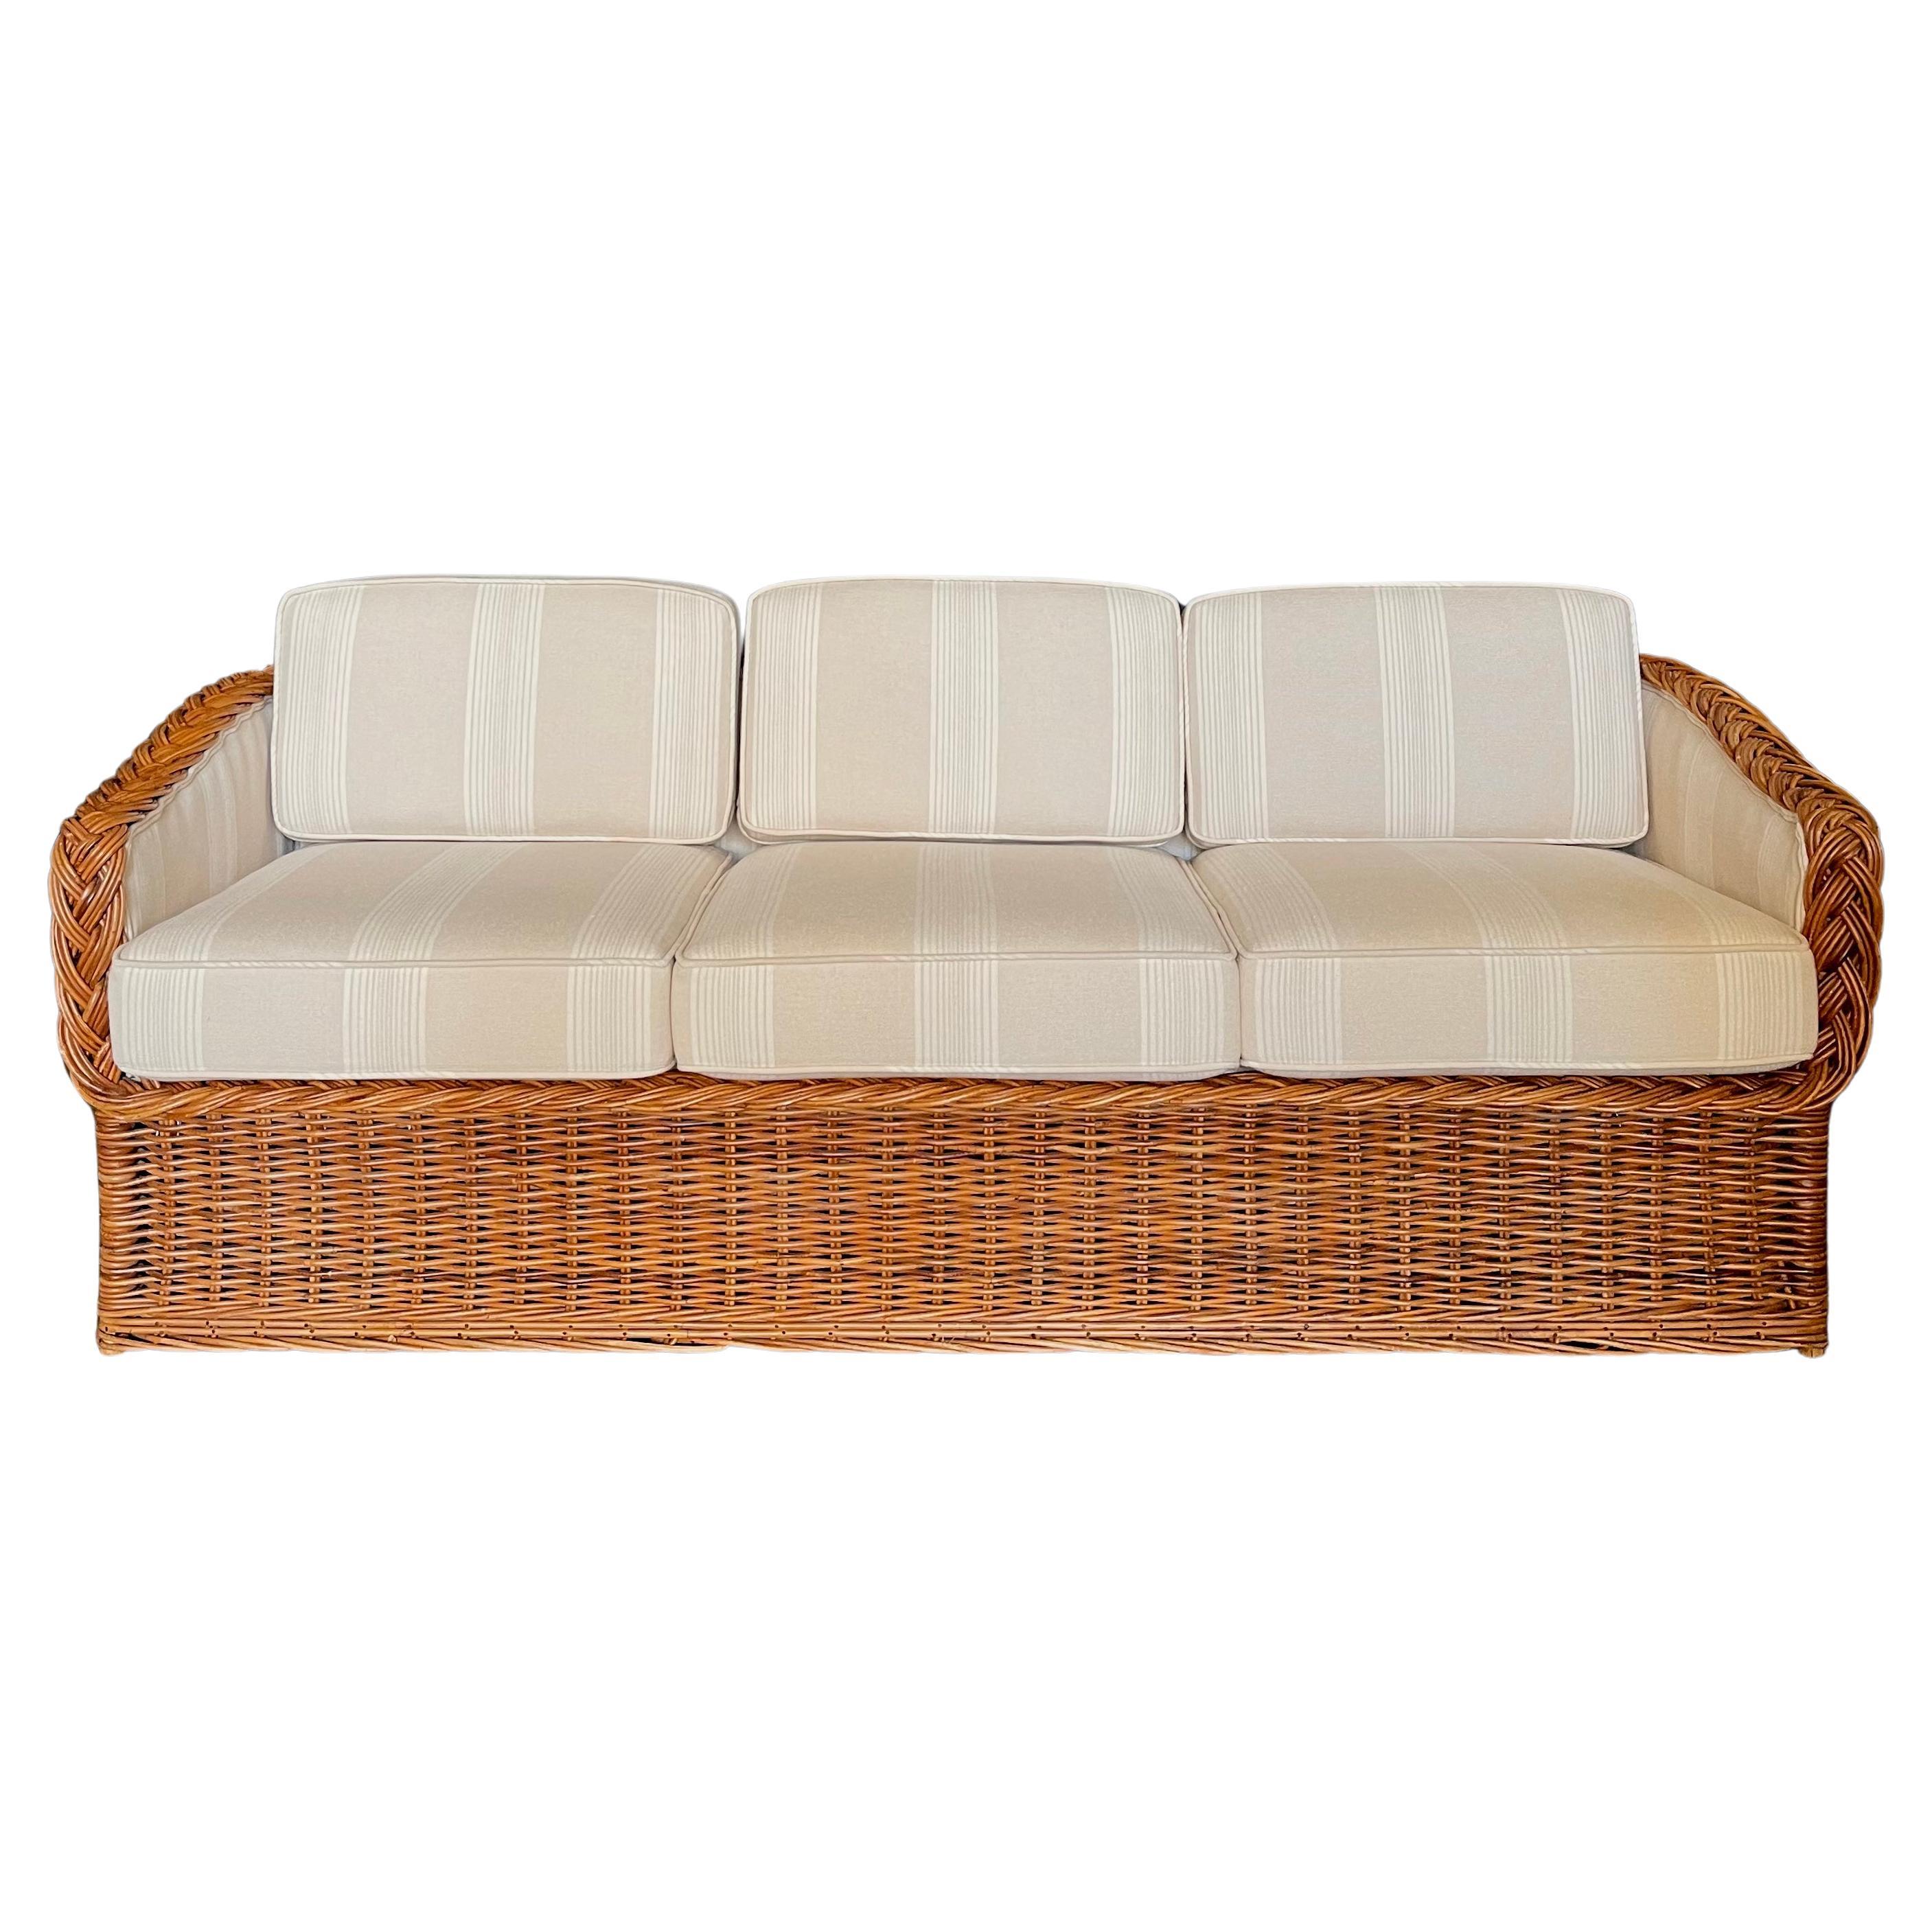 Michael Taylor Style Wicker Rattan Sofa New Performance Upholstery  For Sale